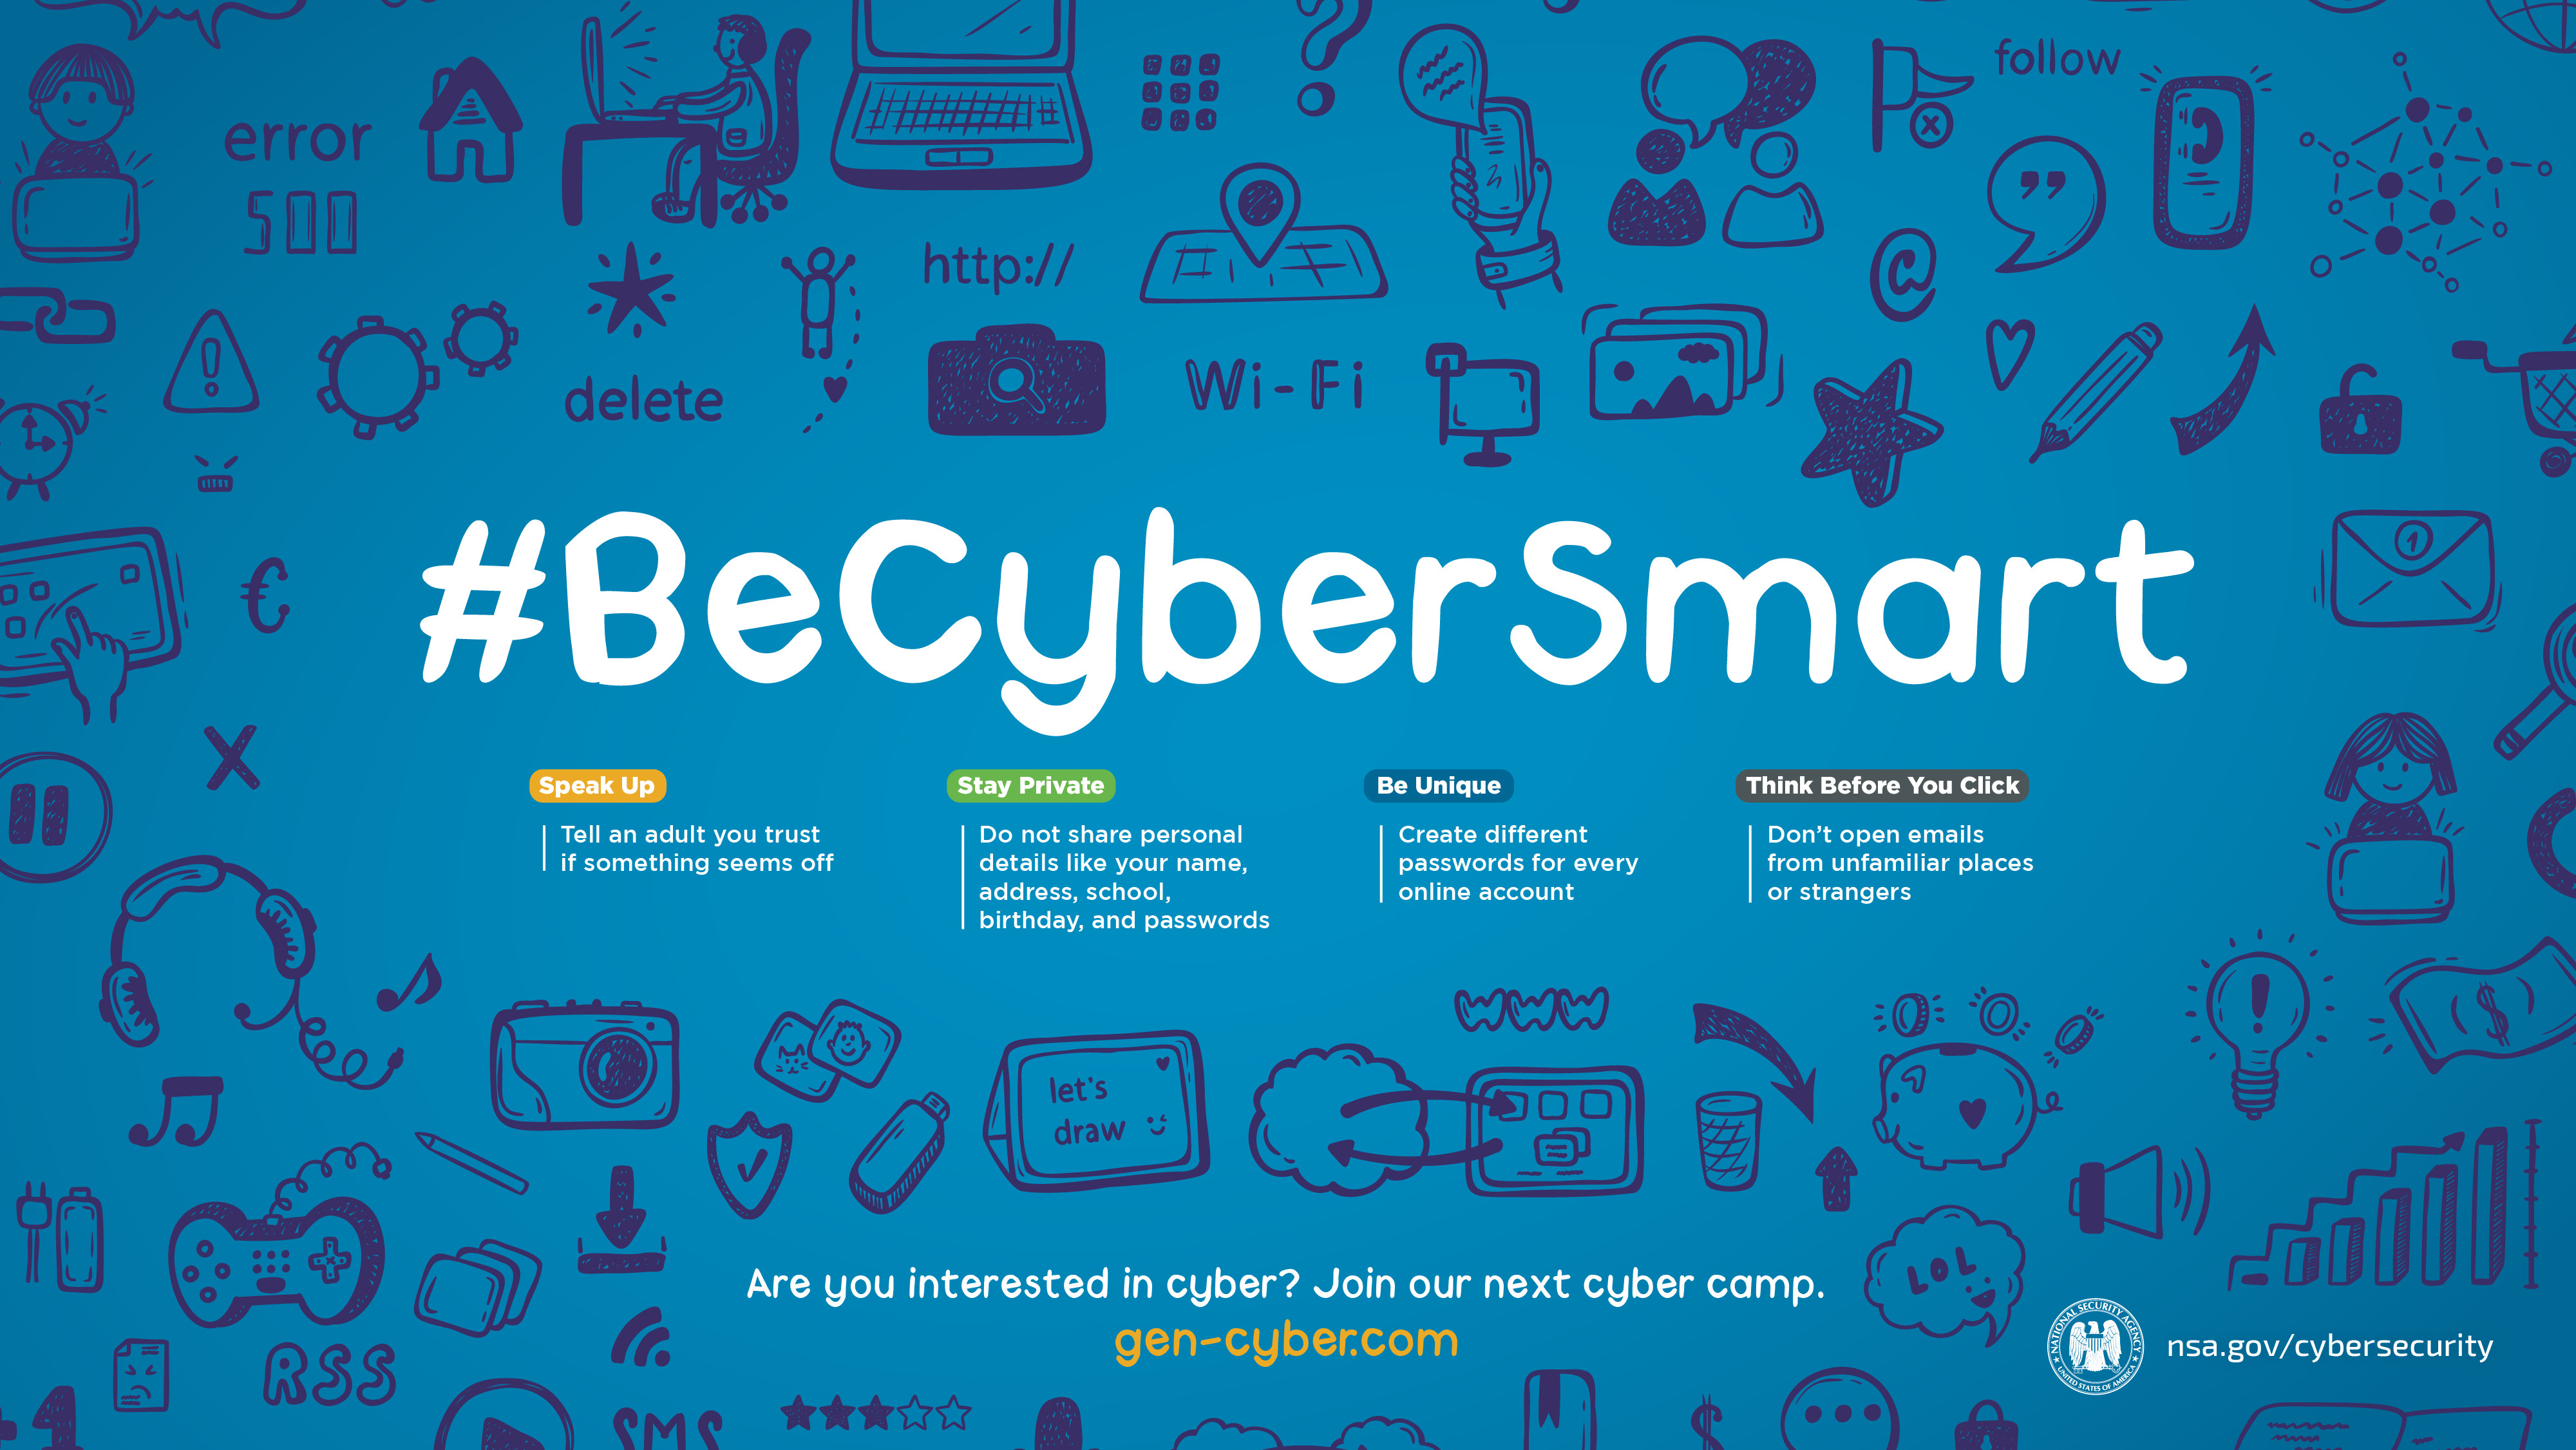 Nsa Releases Becybersmart Wallpaper For National Cybersecurity